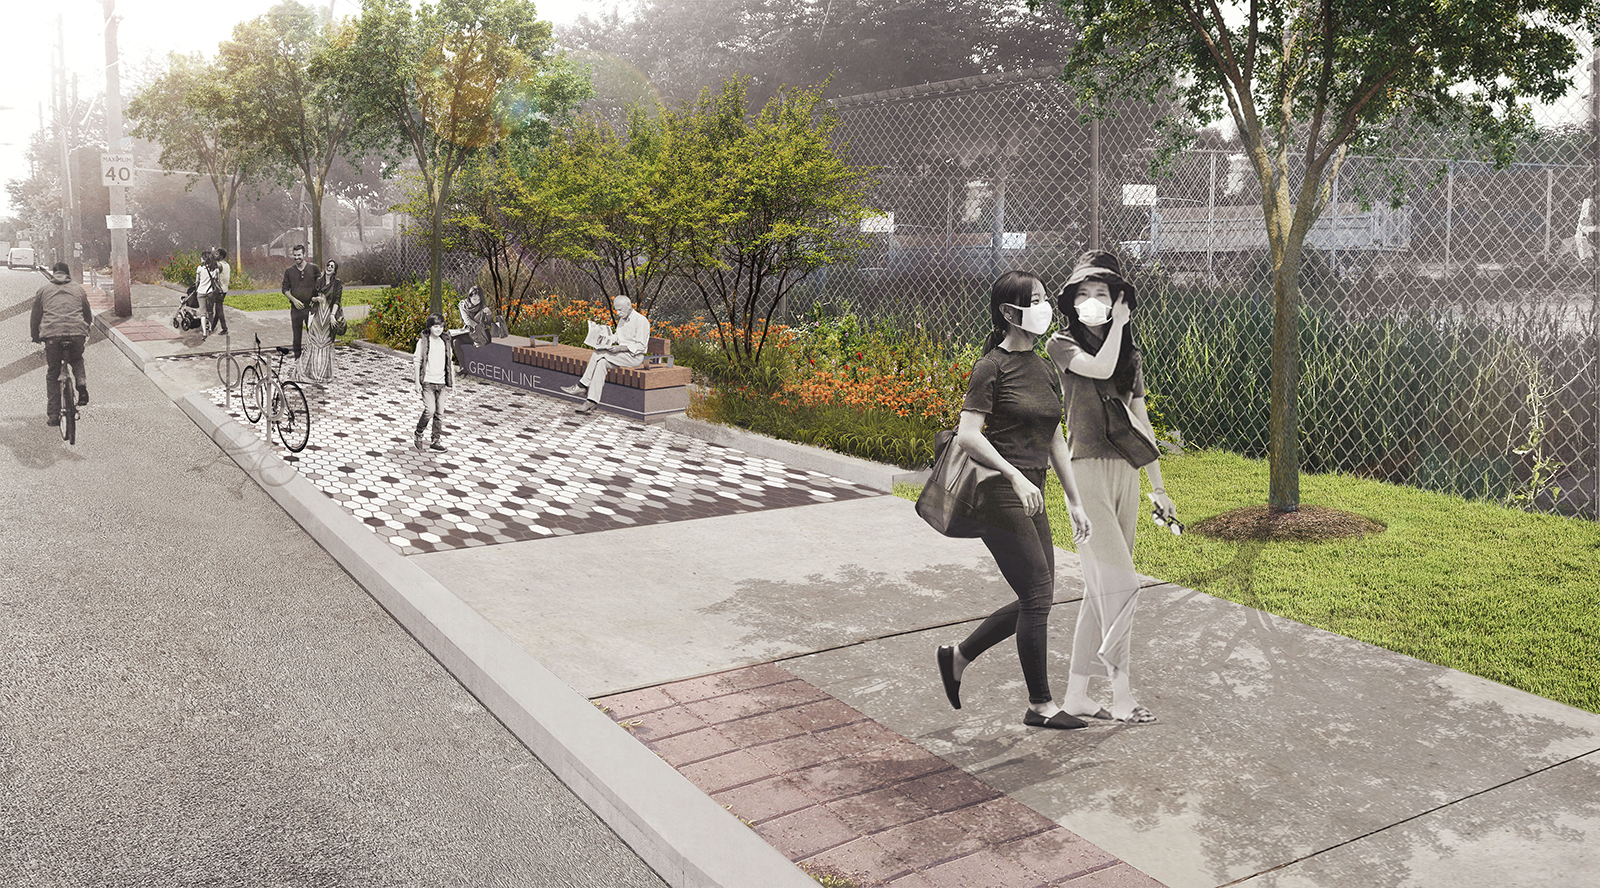 This image shows an artist rendering of a Concept Plan for streetscape improvements on Geary Avenue that are part of the new park Geary which will be built in 2021. The image features design elements from the park, such as special paving, benches and planting that will visually identify this area as a connector between Green Line parks. The illustration shows people sitting on the bench and gathering at the park entrance which can be seen in the background. This image is based on the Concept Plans for the park.